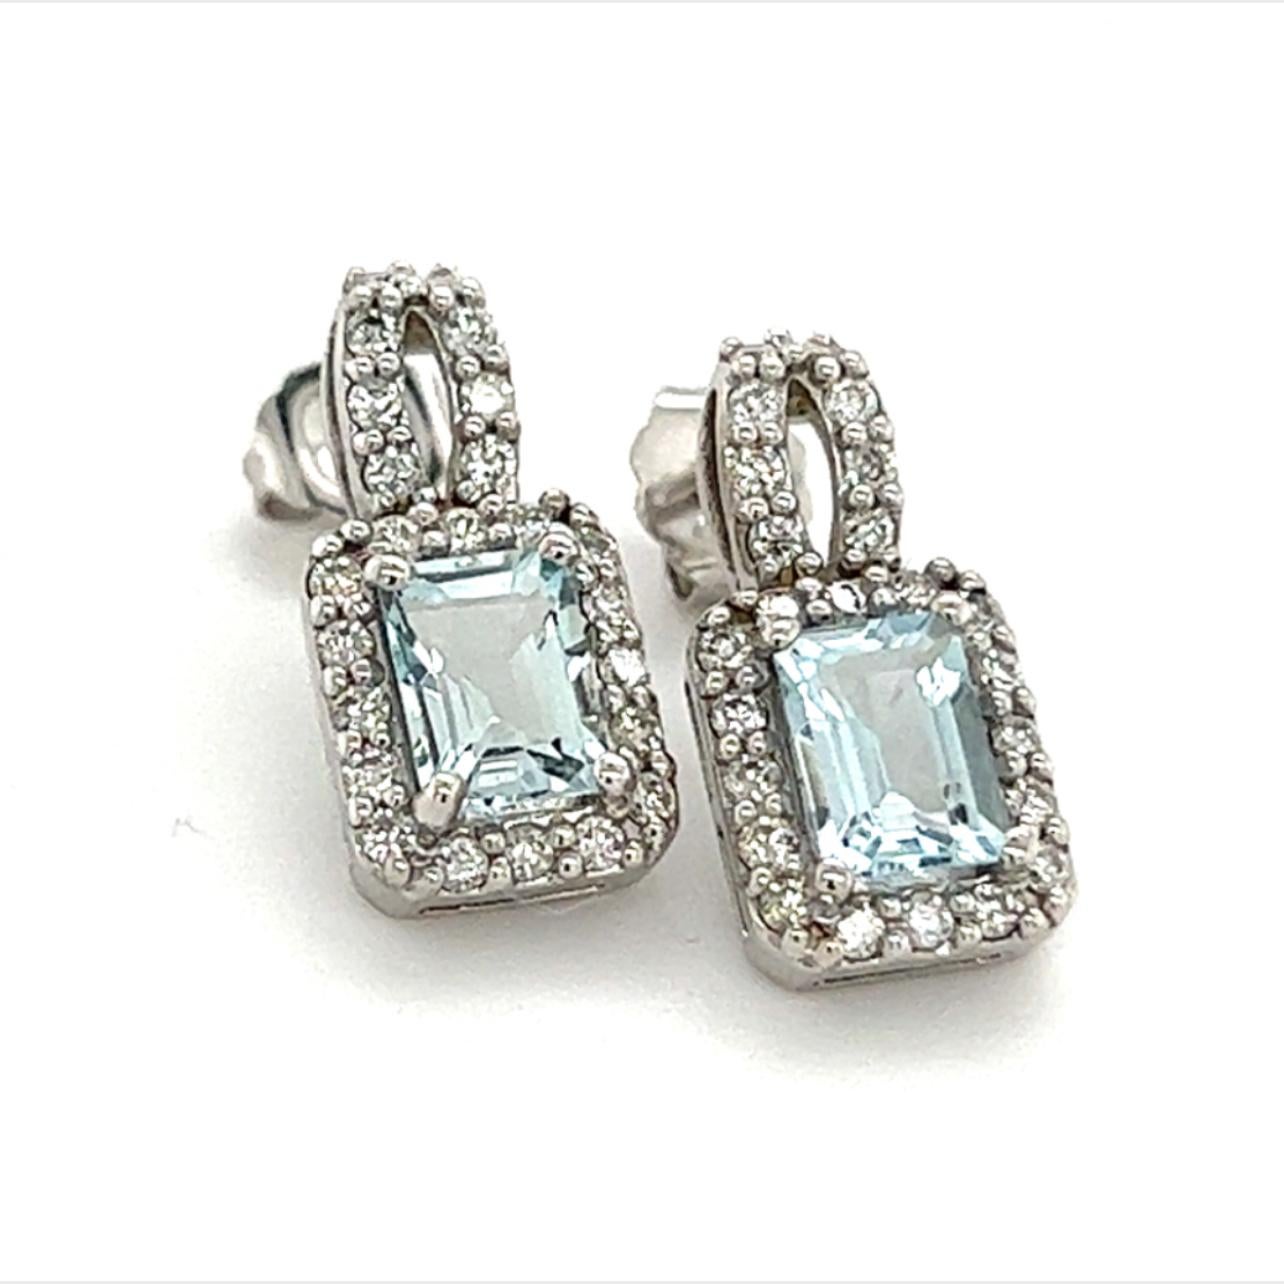 Natural Aquamarine Diamond Earrings 14k Gold 2.38 TCW Certified For Sale 3